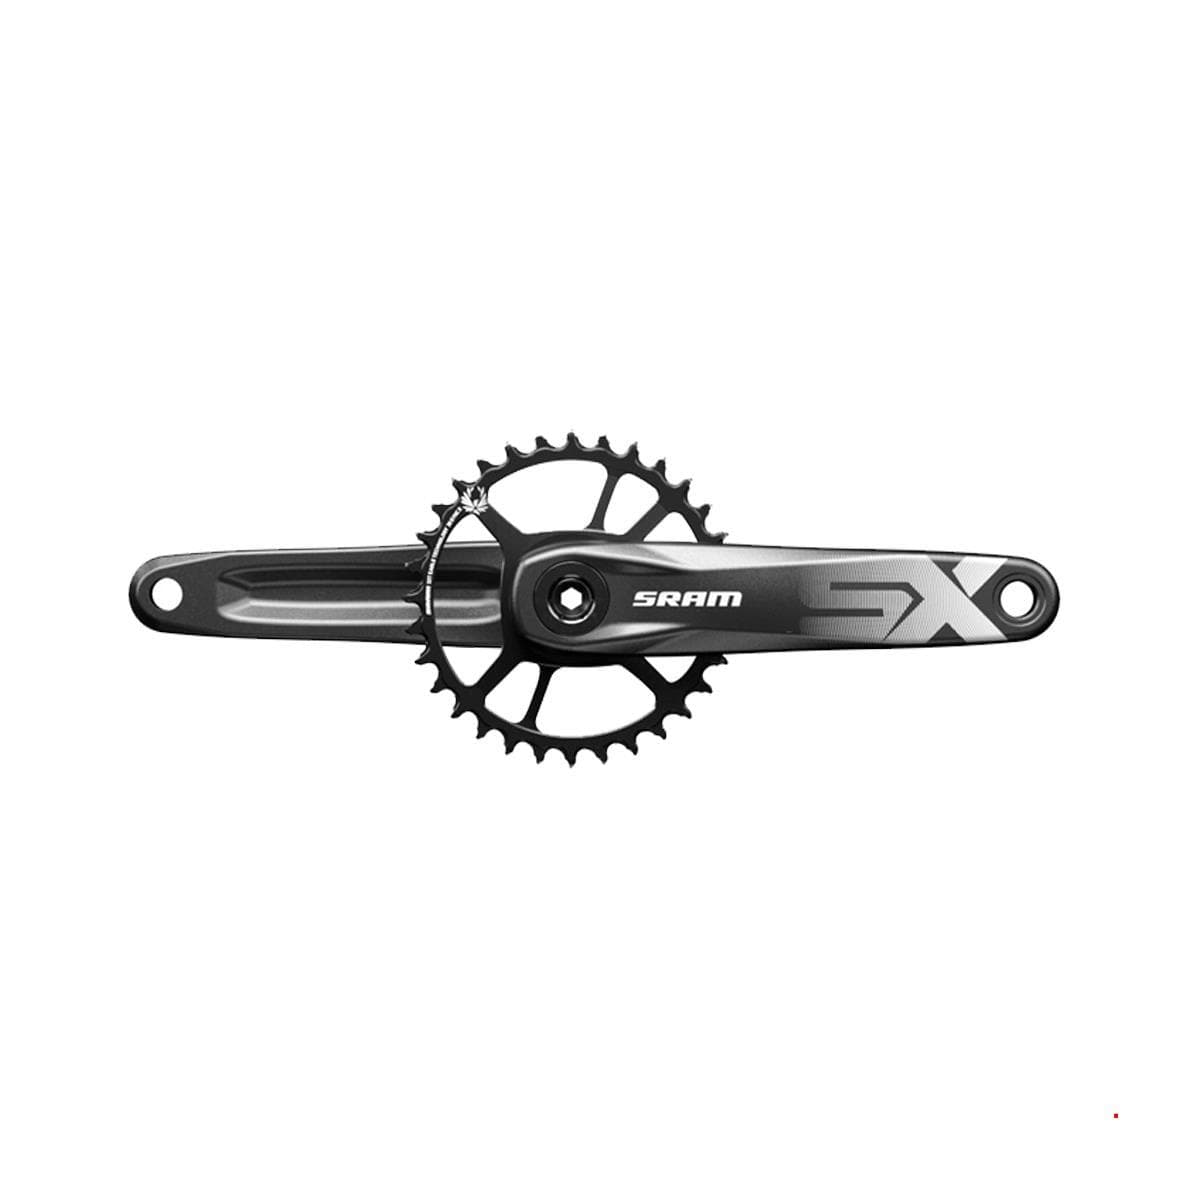 Sram Crankset Sx Eagle Dub 12S With Direct Mount 32T X-Sync 2 Steel Chainring A1: Black 170Mm